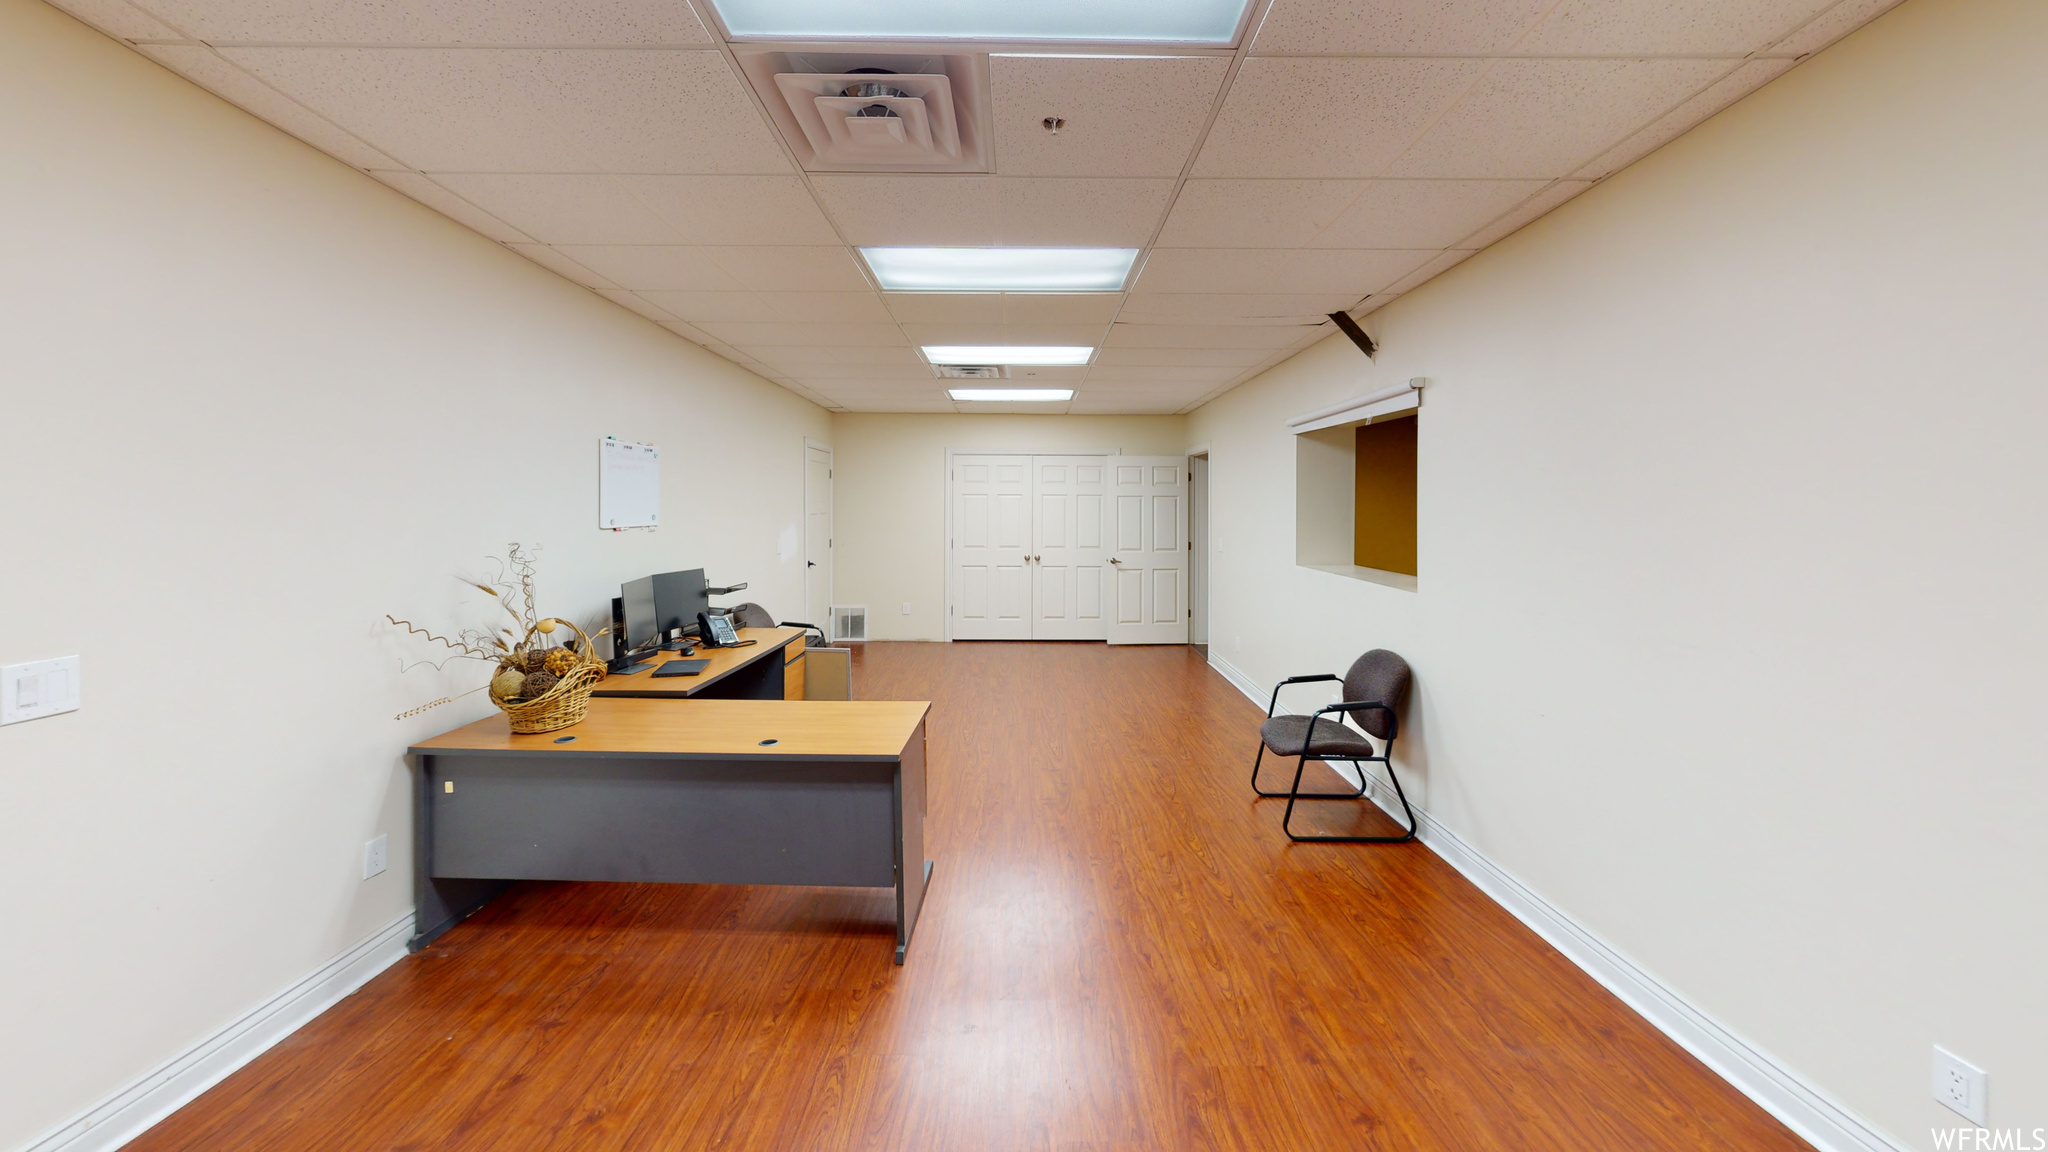 Office area featuring a drop ceiling and light hardwood flooring